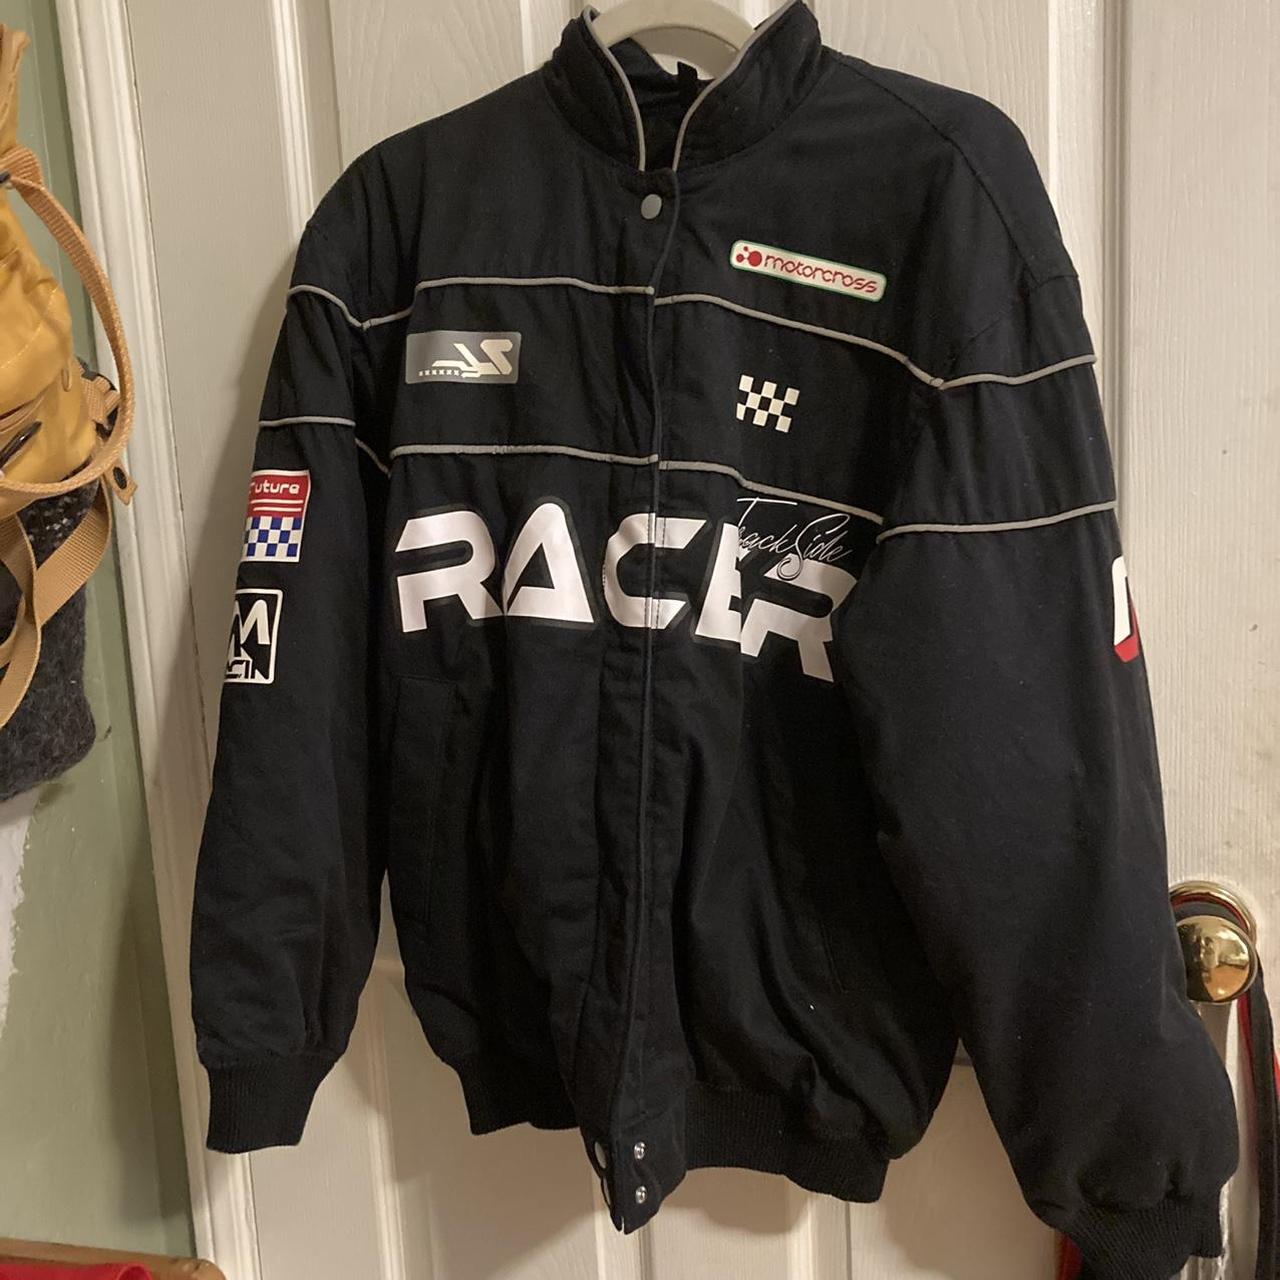 super cool race car jacket from h&m barely worn no... - Depop